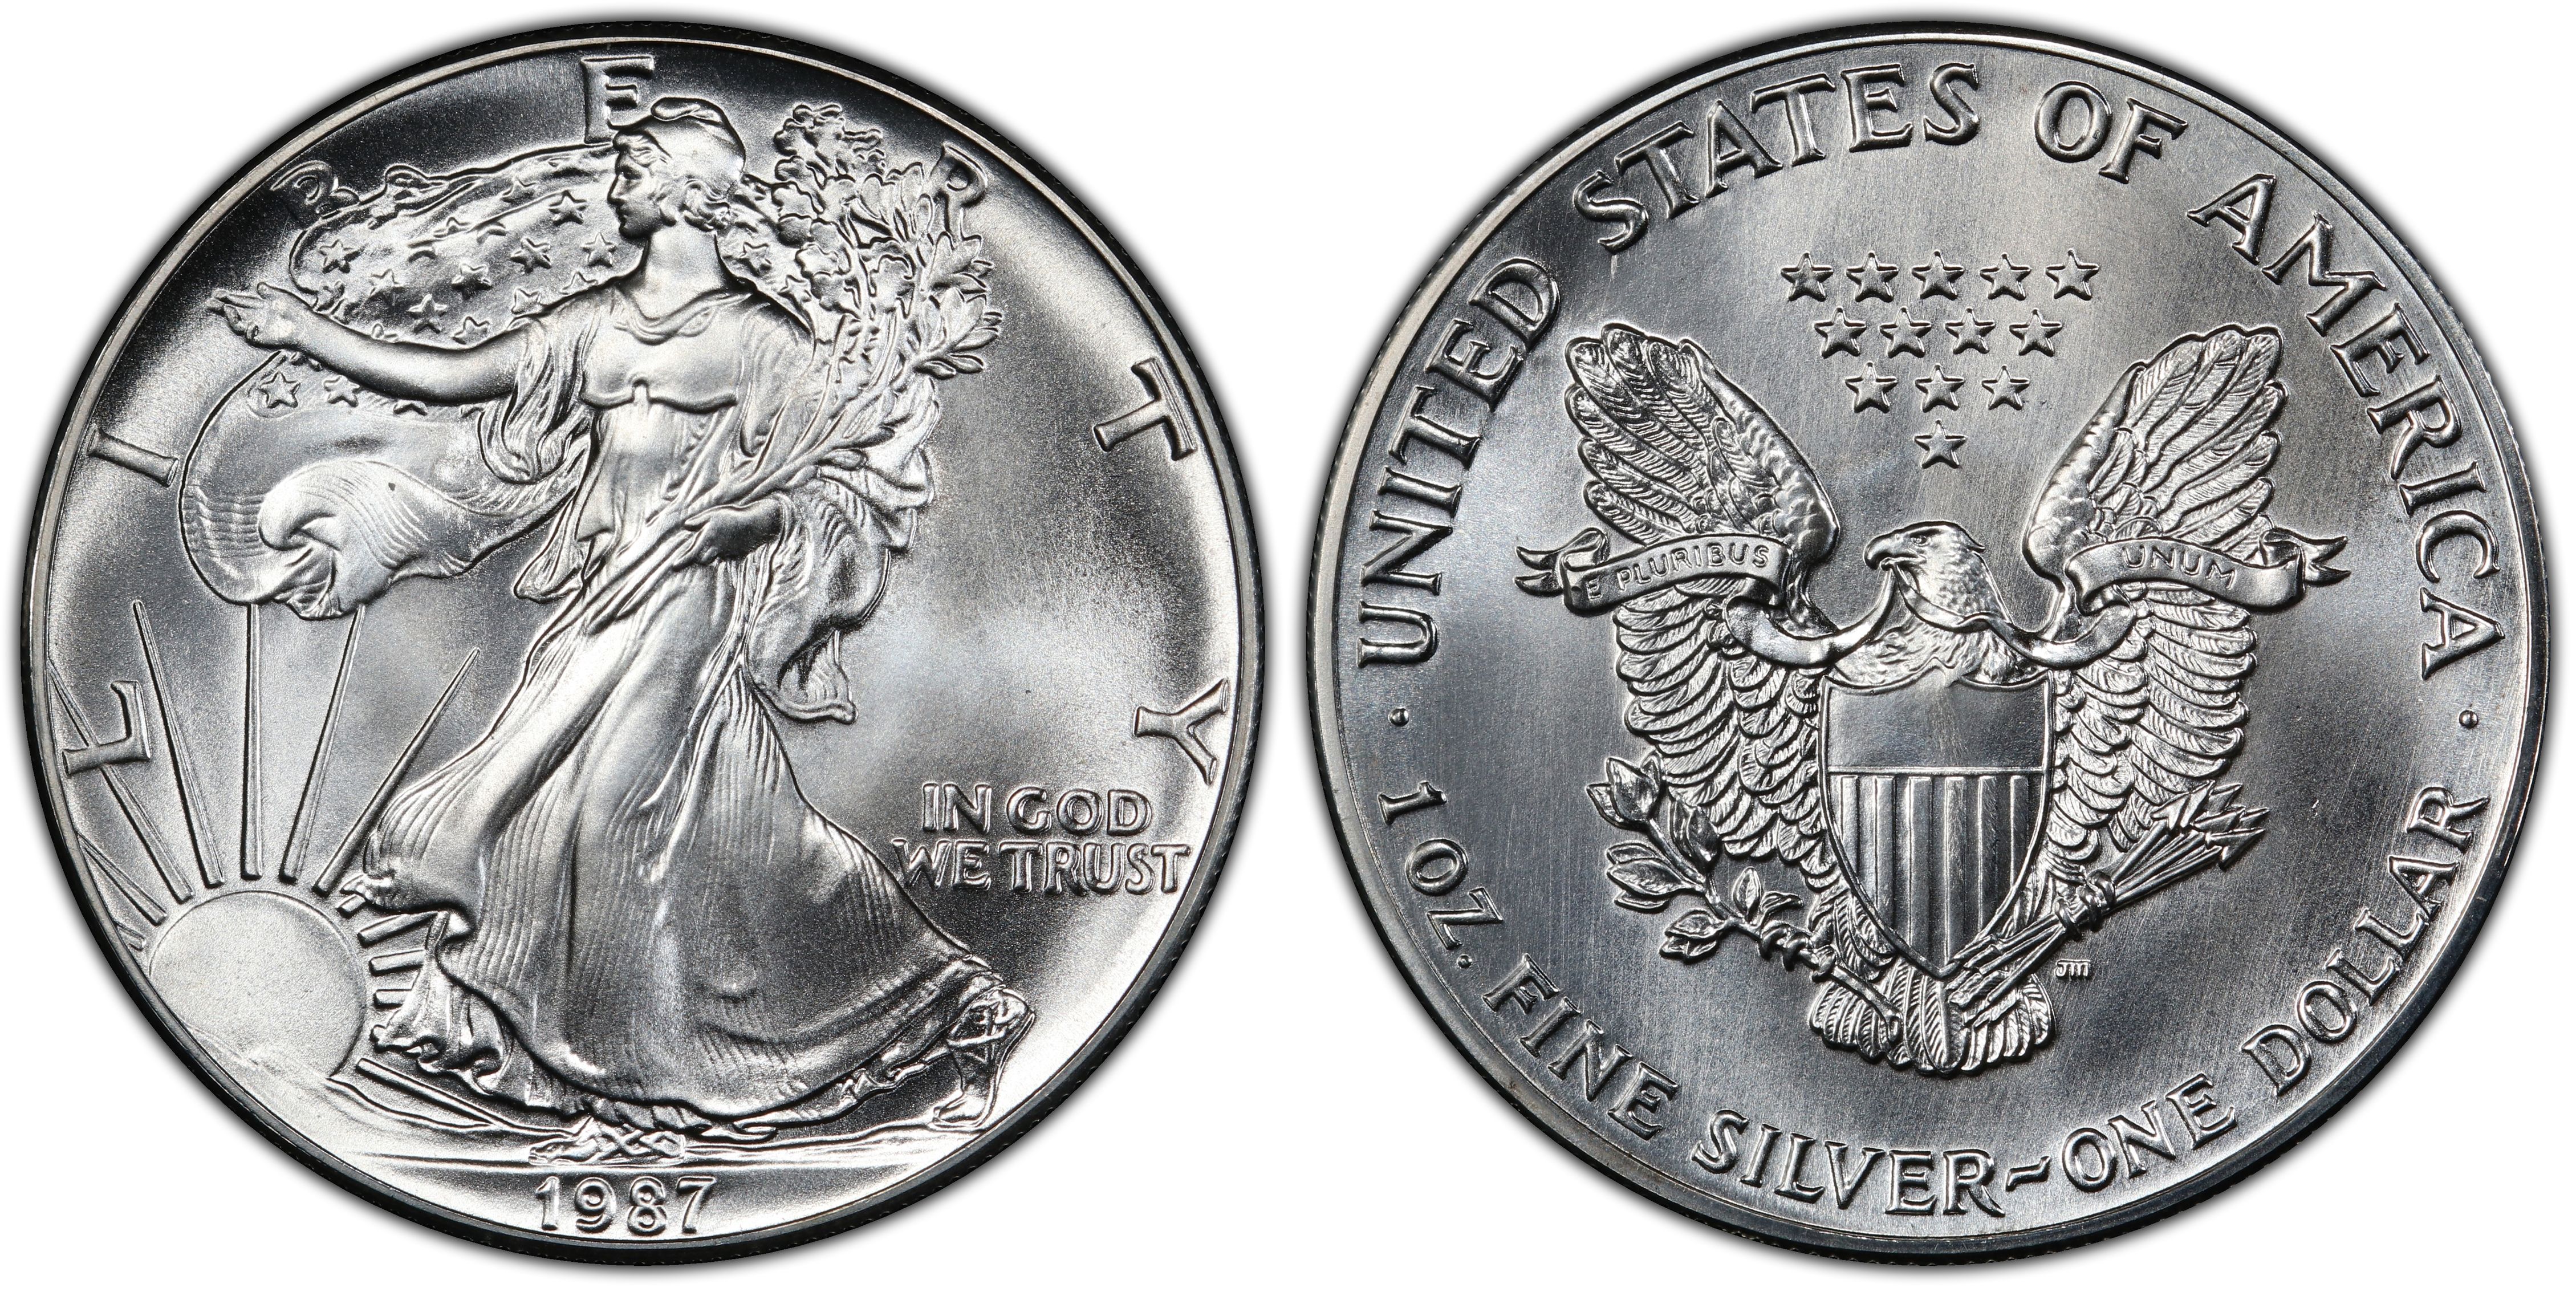 1987 $1 Silver Eagle (Regular Strike) Silver Eagles - PCGS CoinFacts